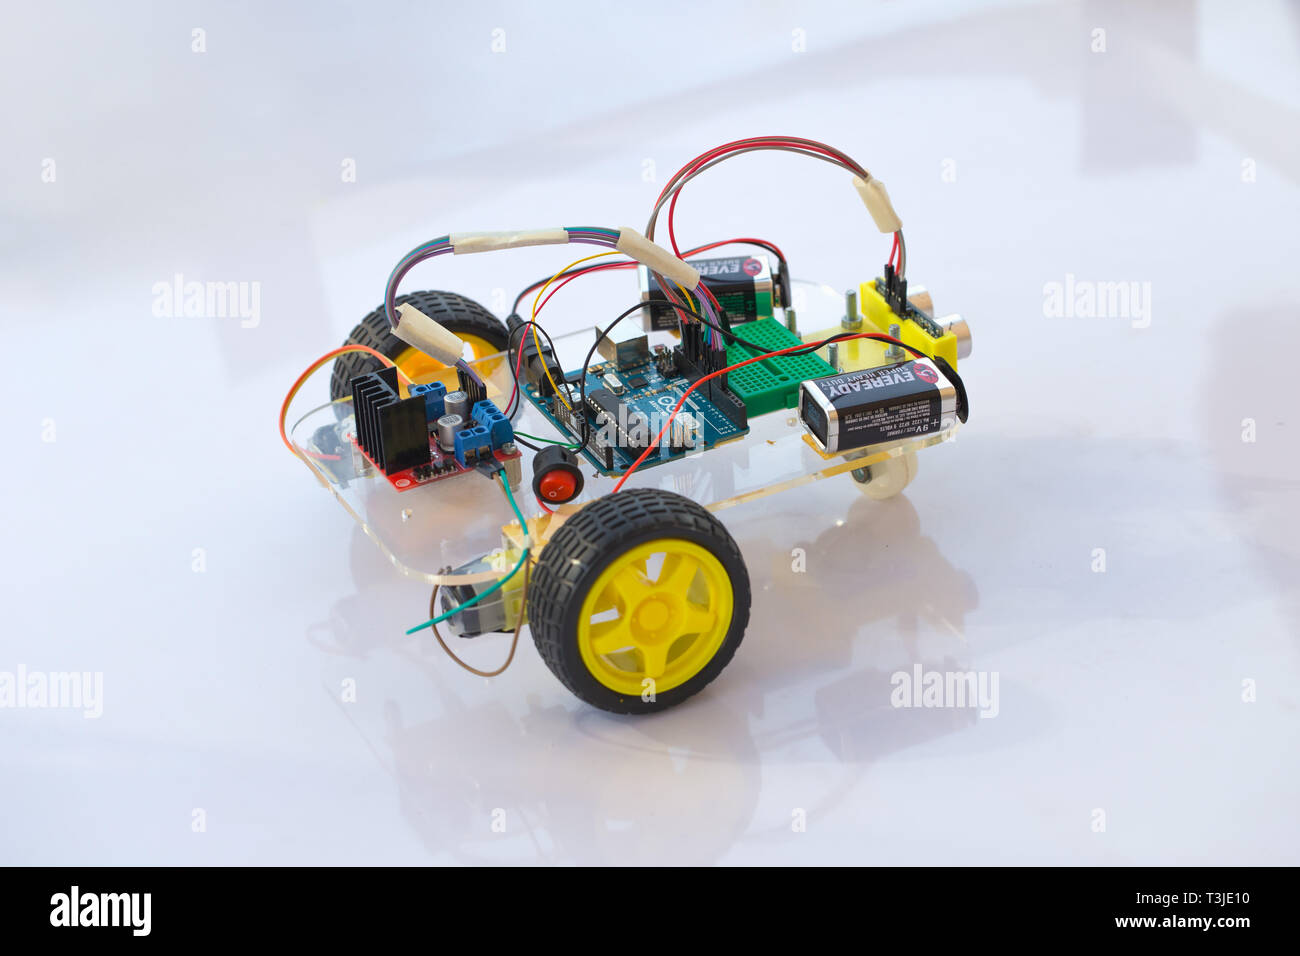 electornic car robot kit module made from micro controller open source circuit hardware for kid education future.20 January 2018, Bangkok, Thailand. Stock Photo